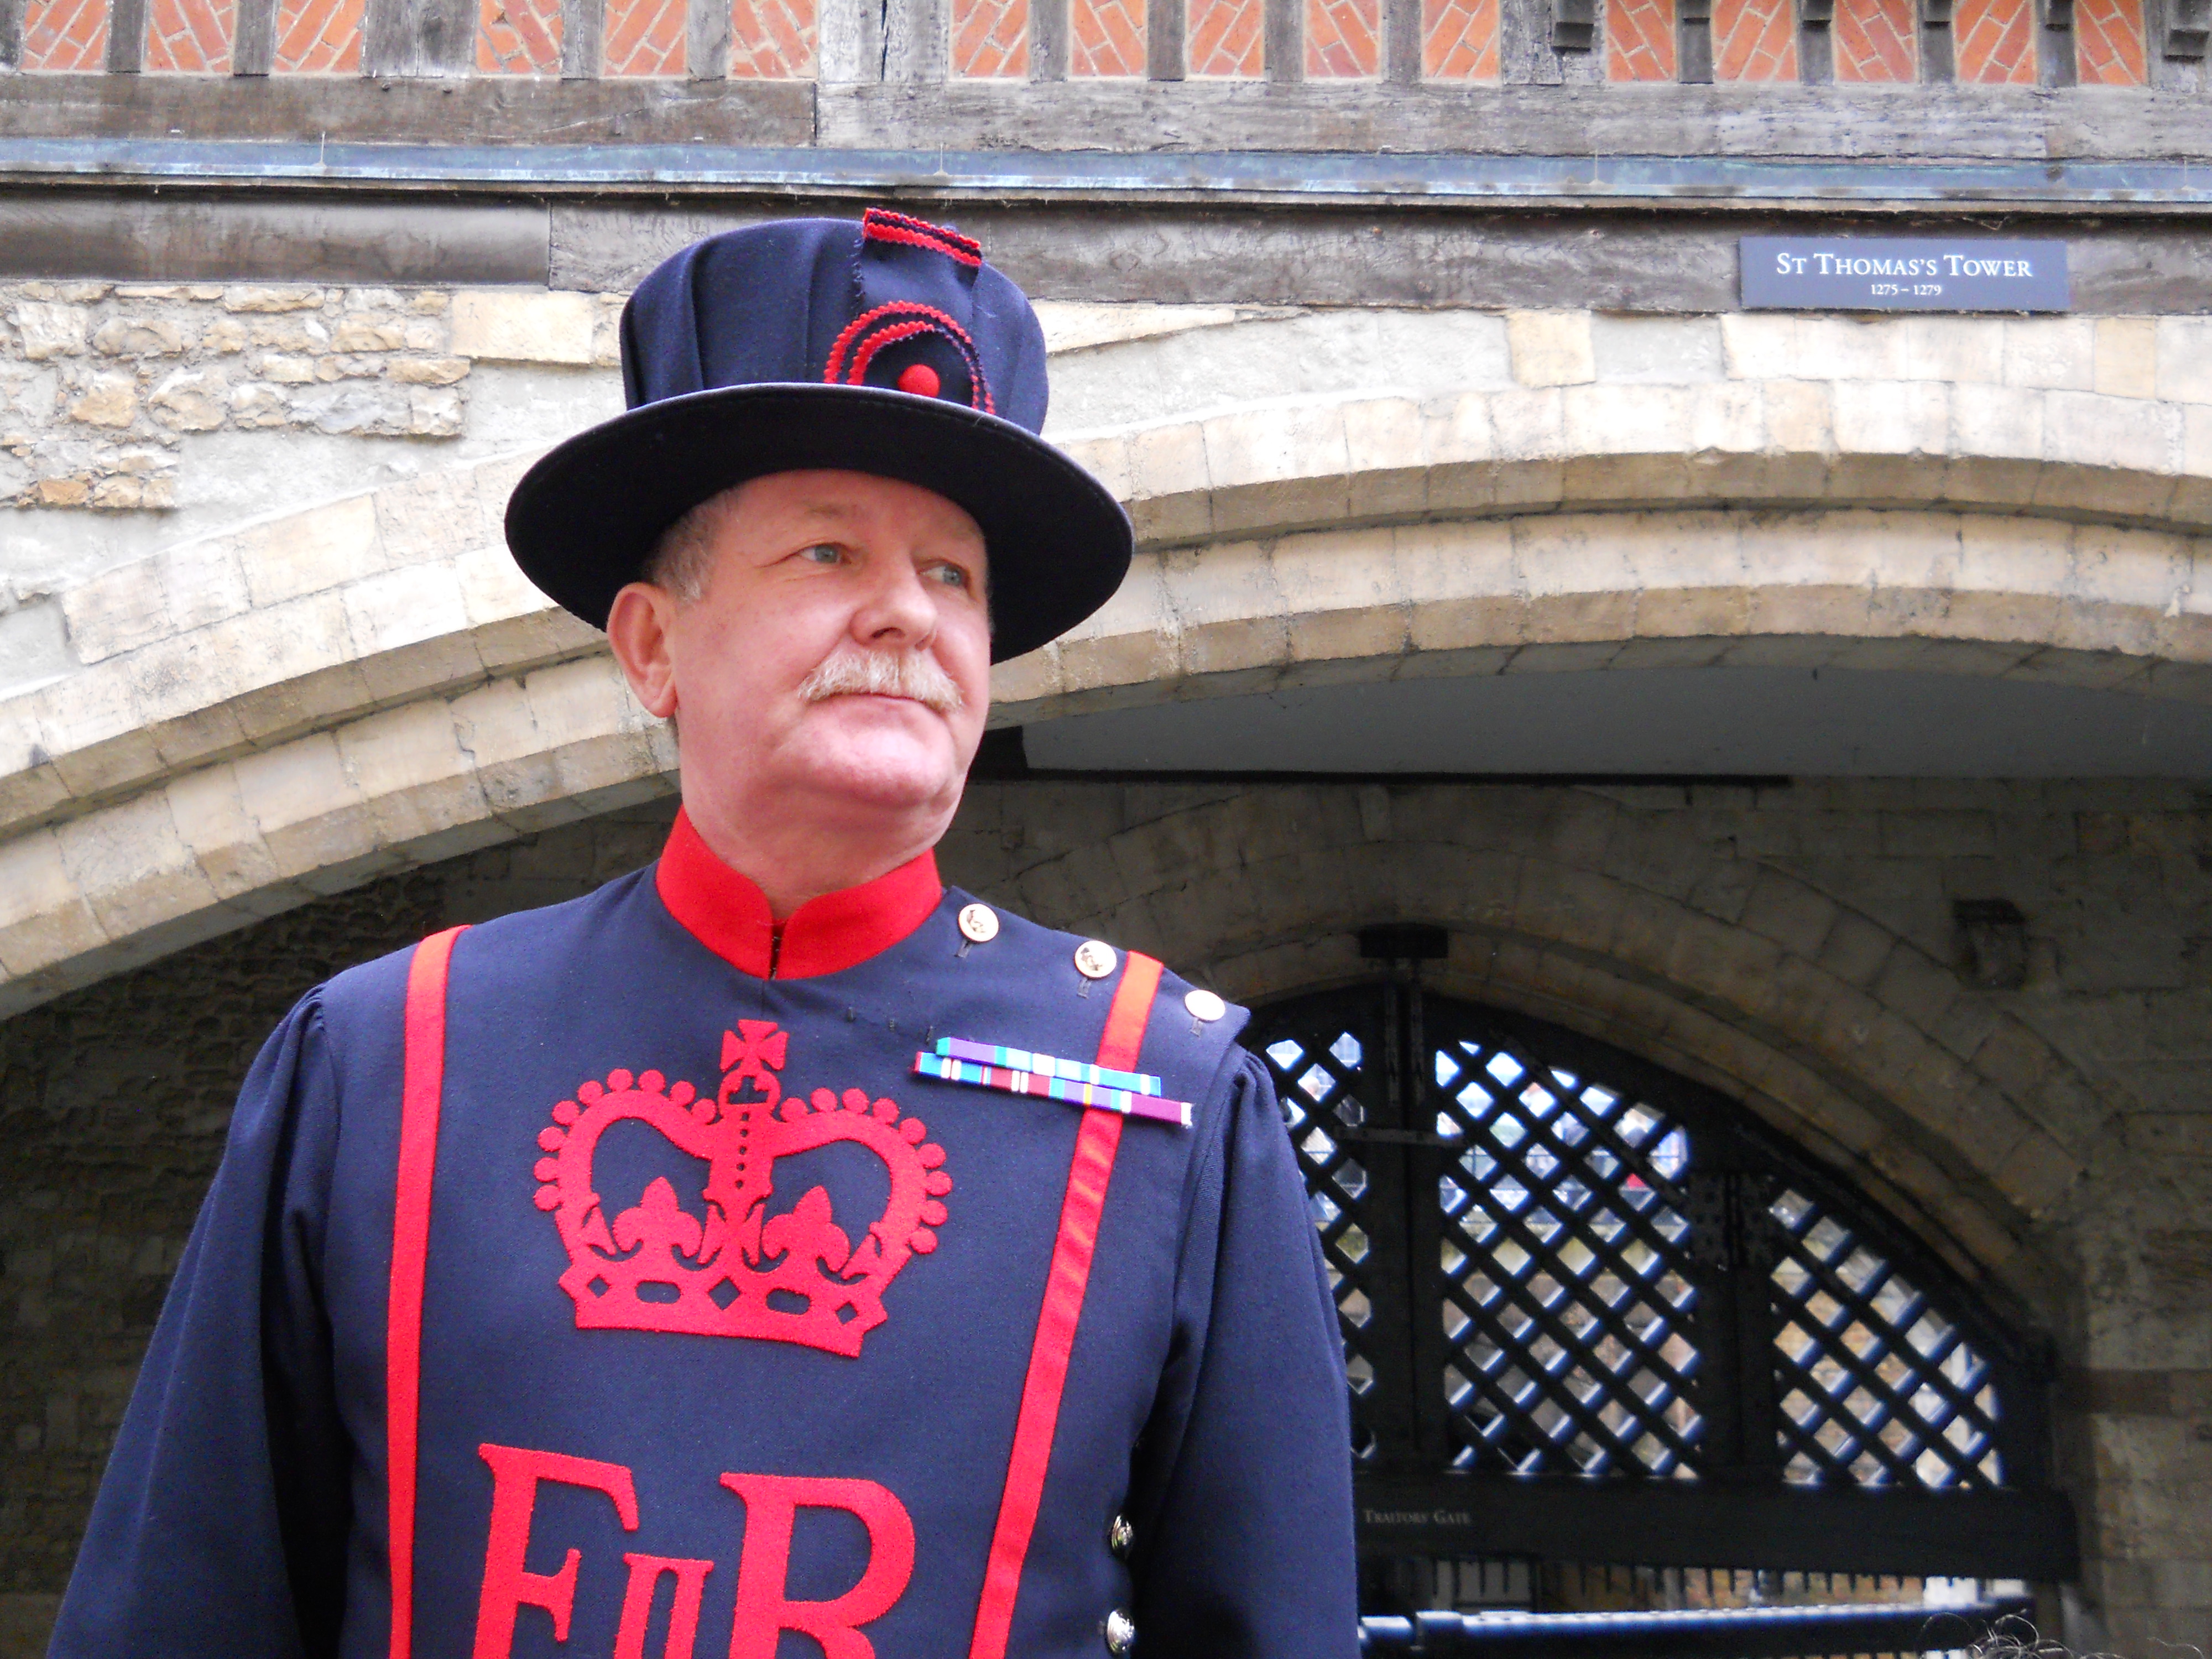 Tours of the Tower were led by Yeoman Warders, also known as Beefeaters